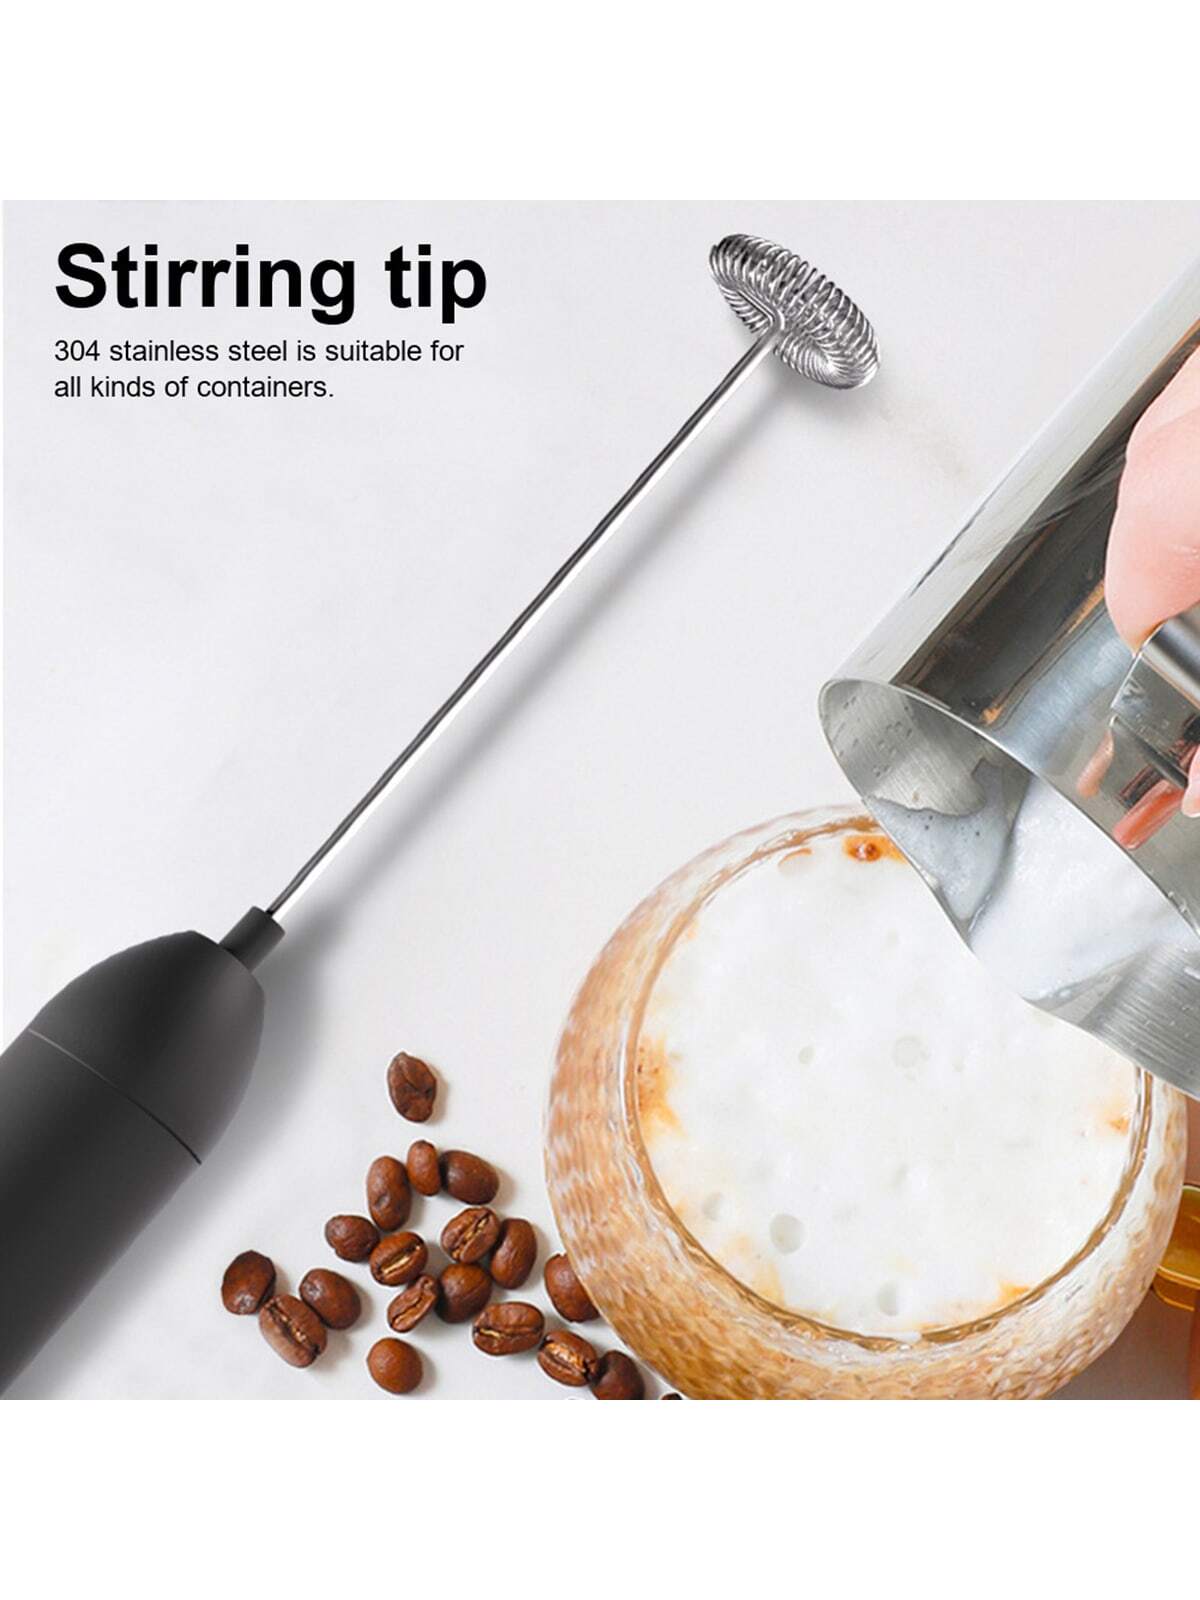 1pc Mini Handheld Electric Milk Frother And Egg Beater With Stainless Steel  Whisk Head, Powered By 2 Aa Batteries, Suitable For Home Kitchen Whisking  Egg White, Frothing Milk, Whipping Cream